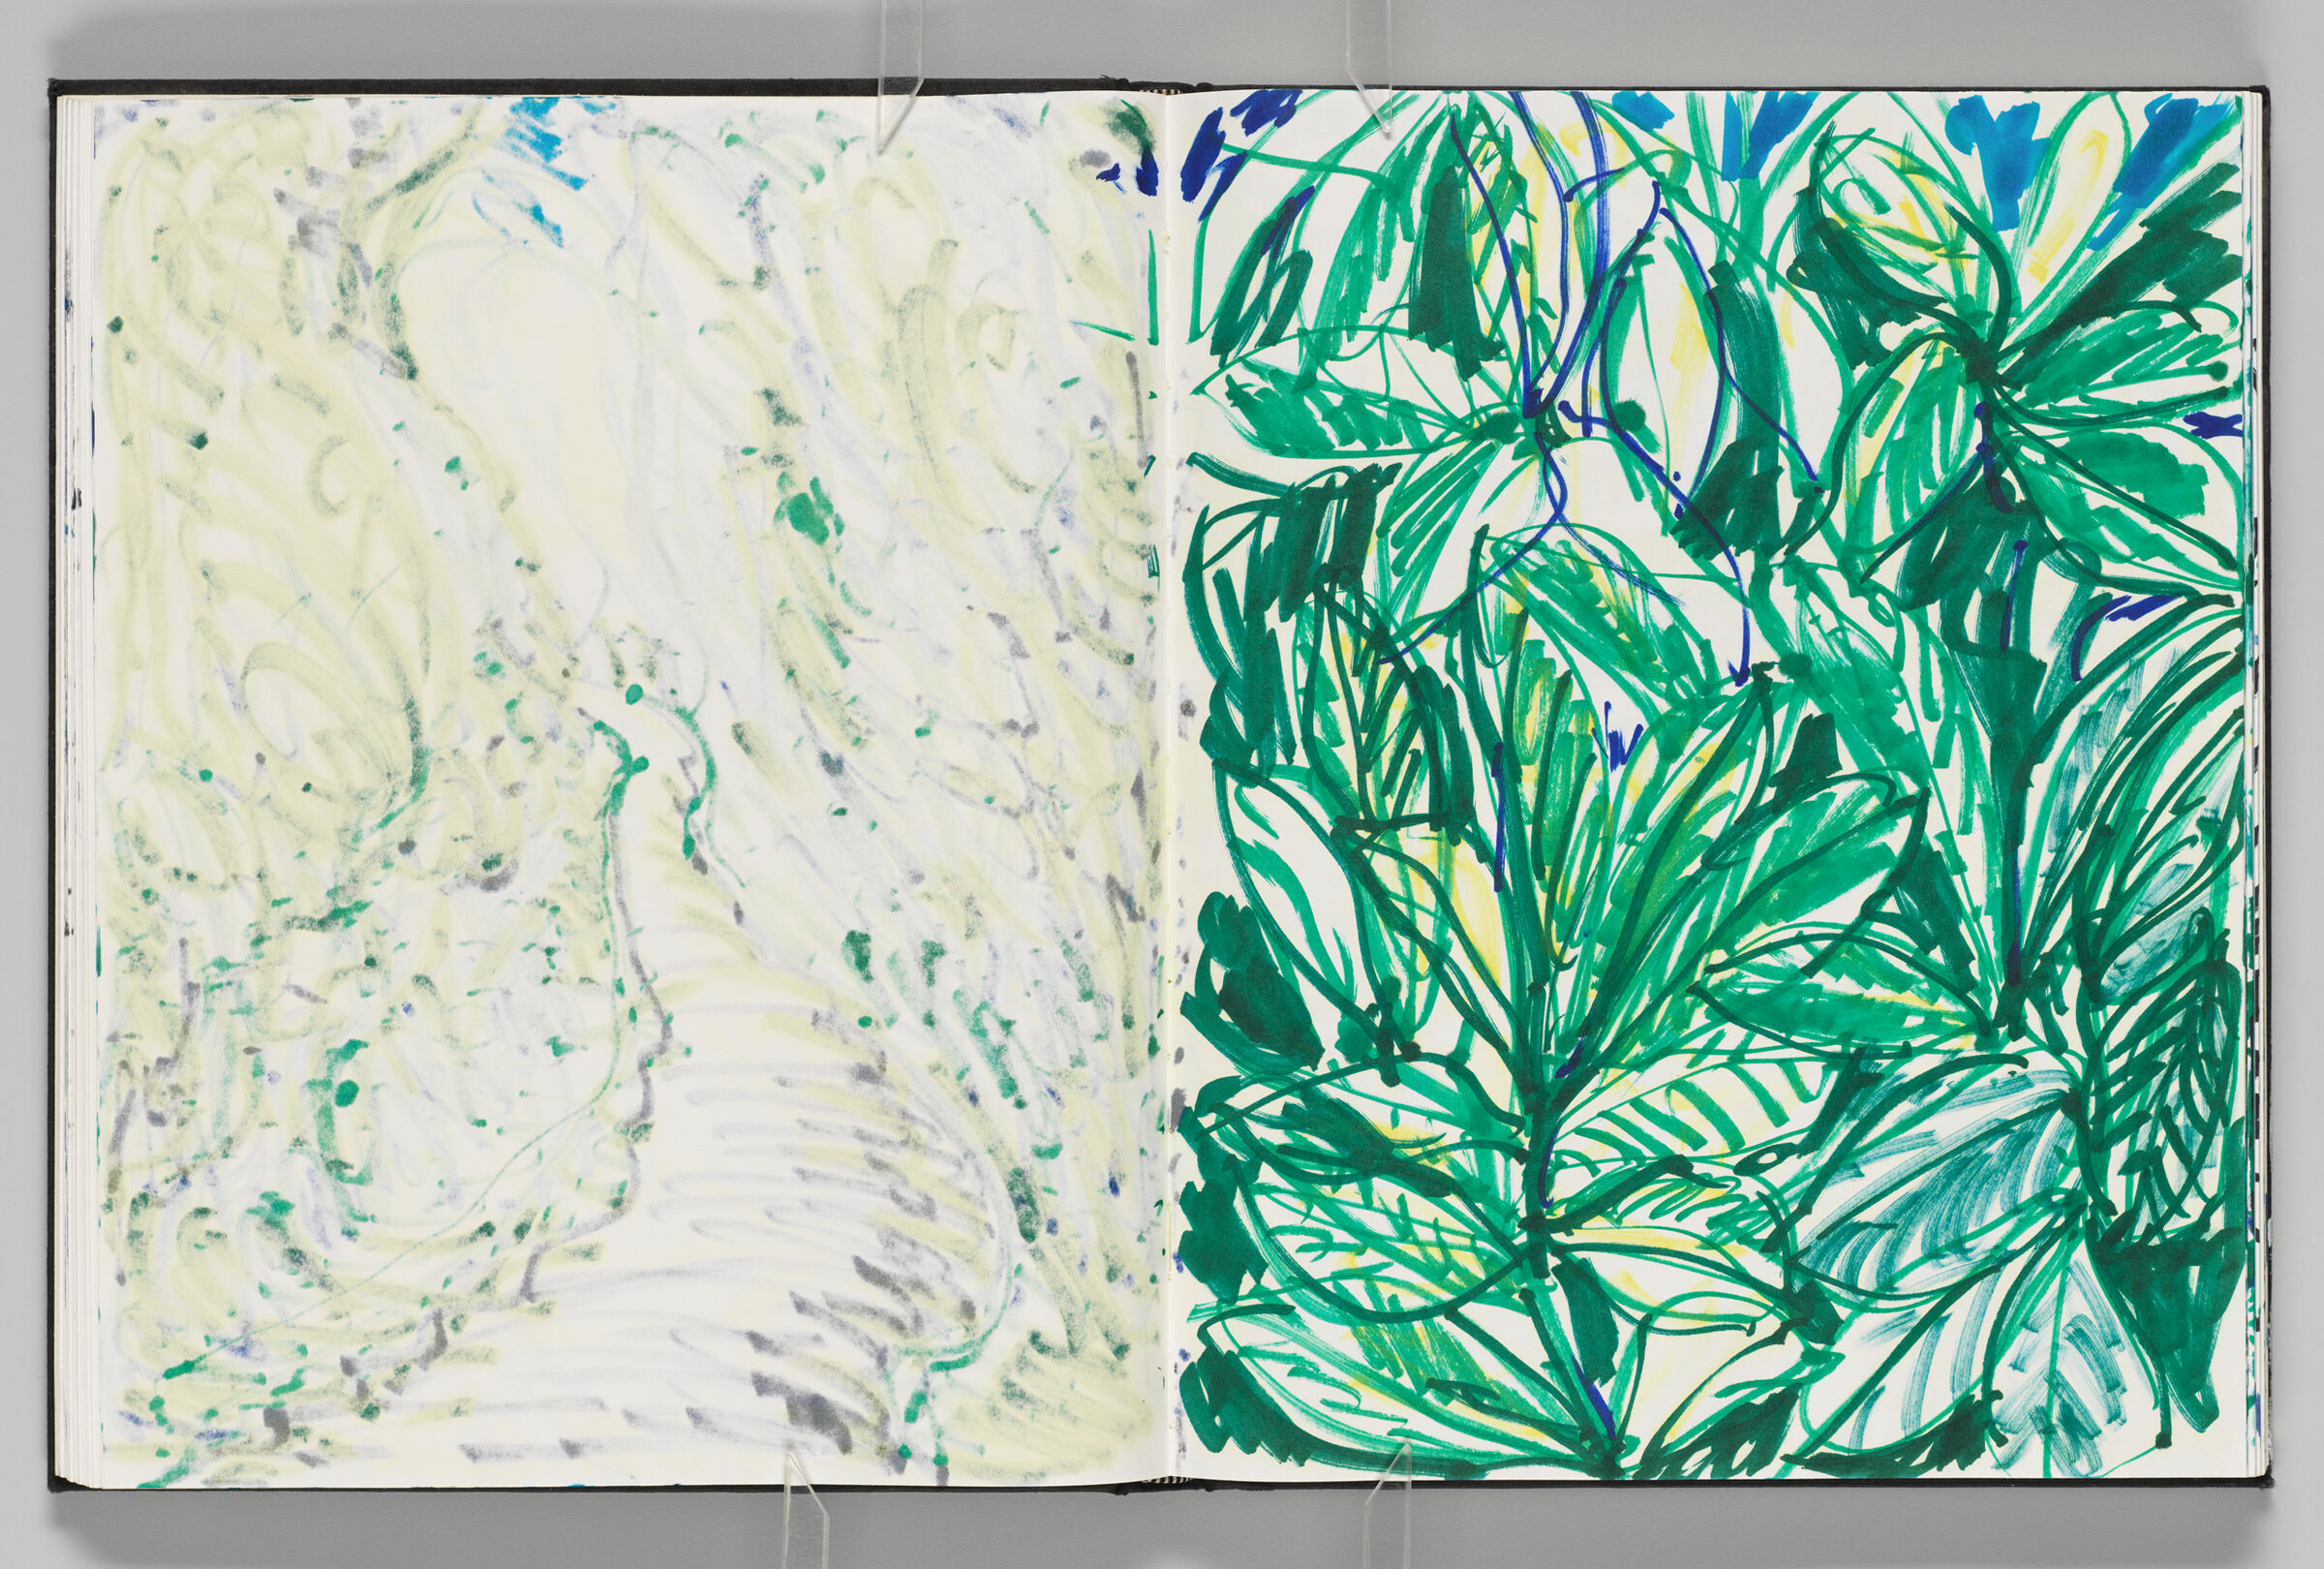 Untitled (Bleed-Through Of Previous Page, Left Page); Untitled (Foliage, Right Page)
